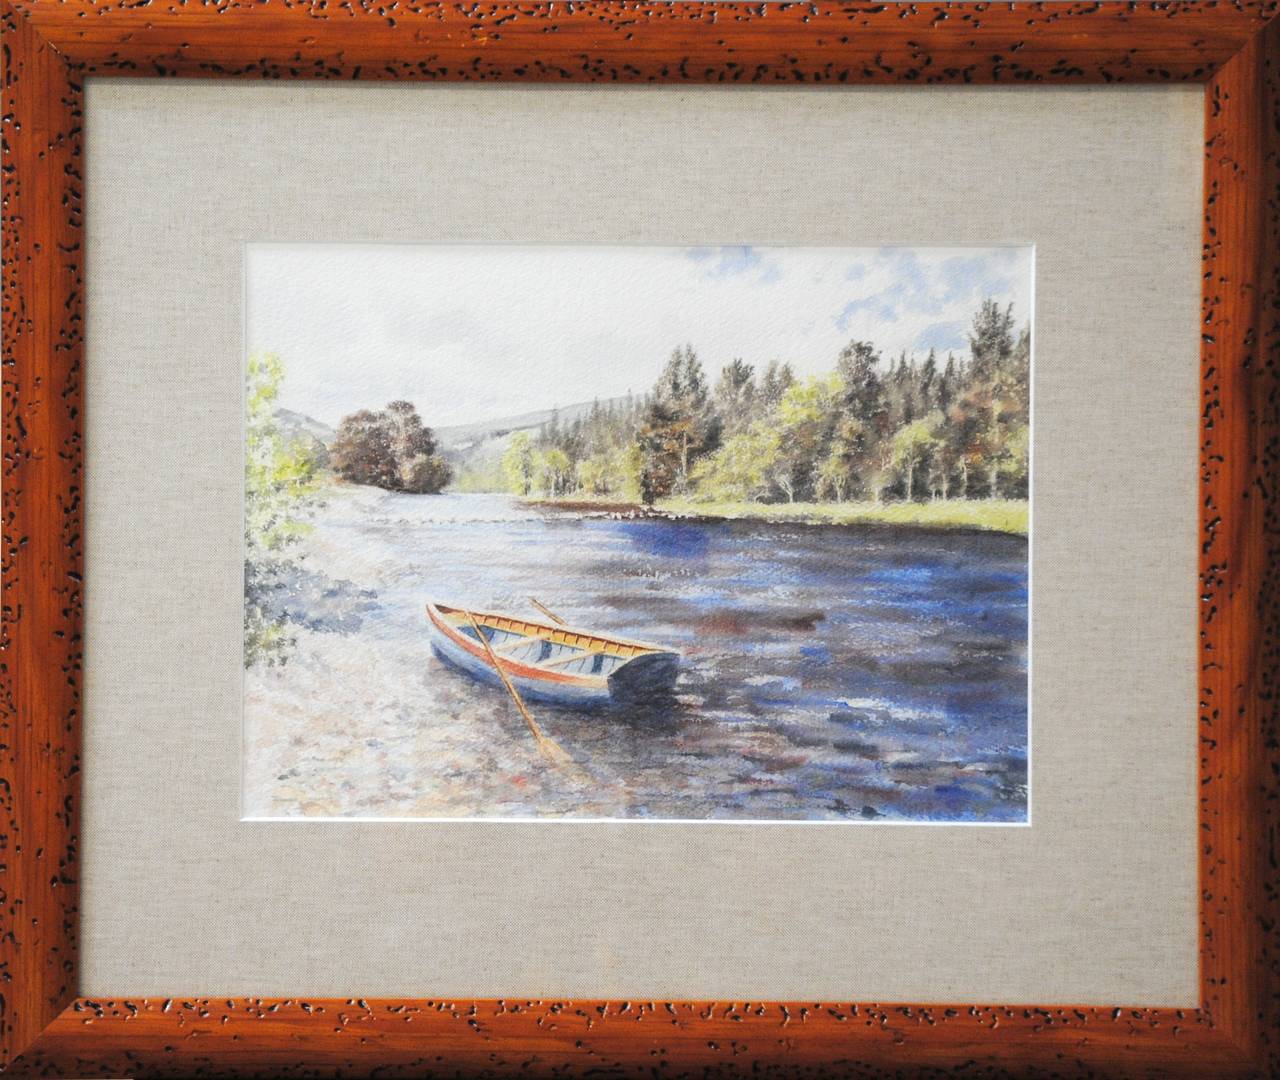 Spring On The River Ness, Inverness, Scotland, Fully Framed. - Art by Gillie Cawthorne